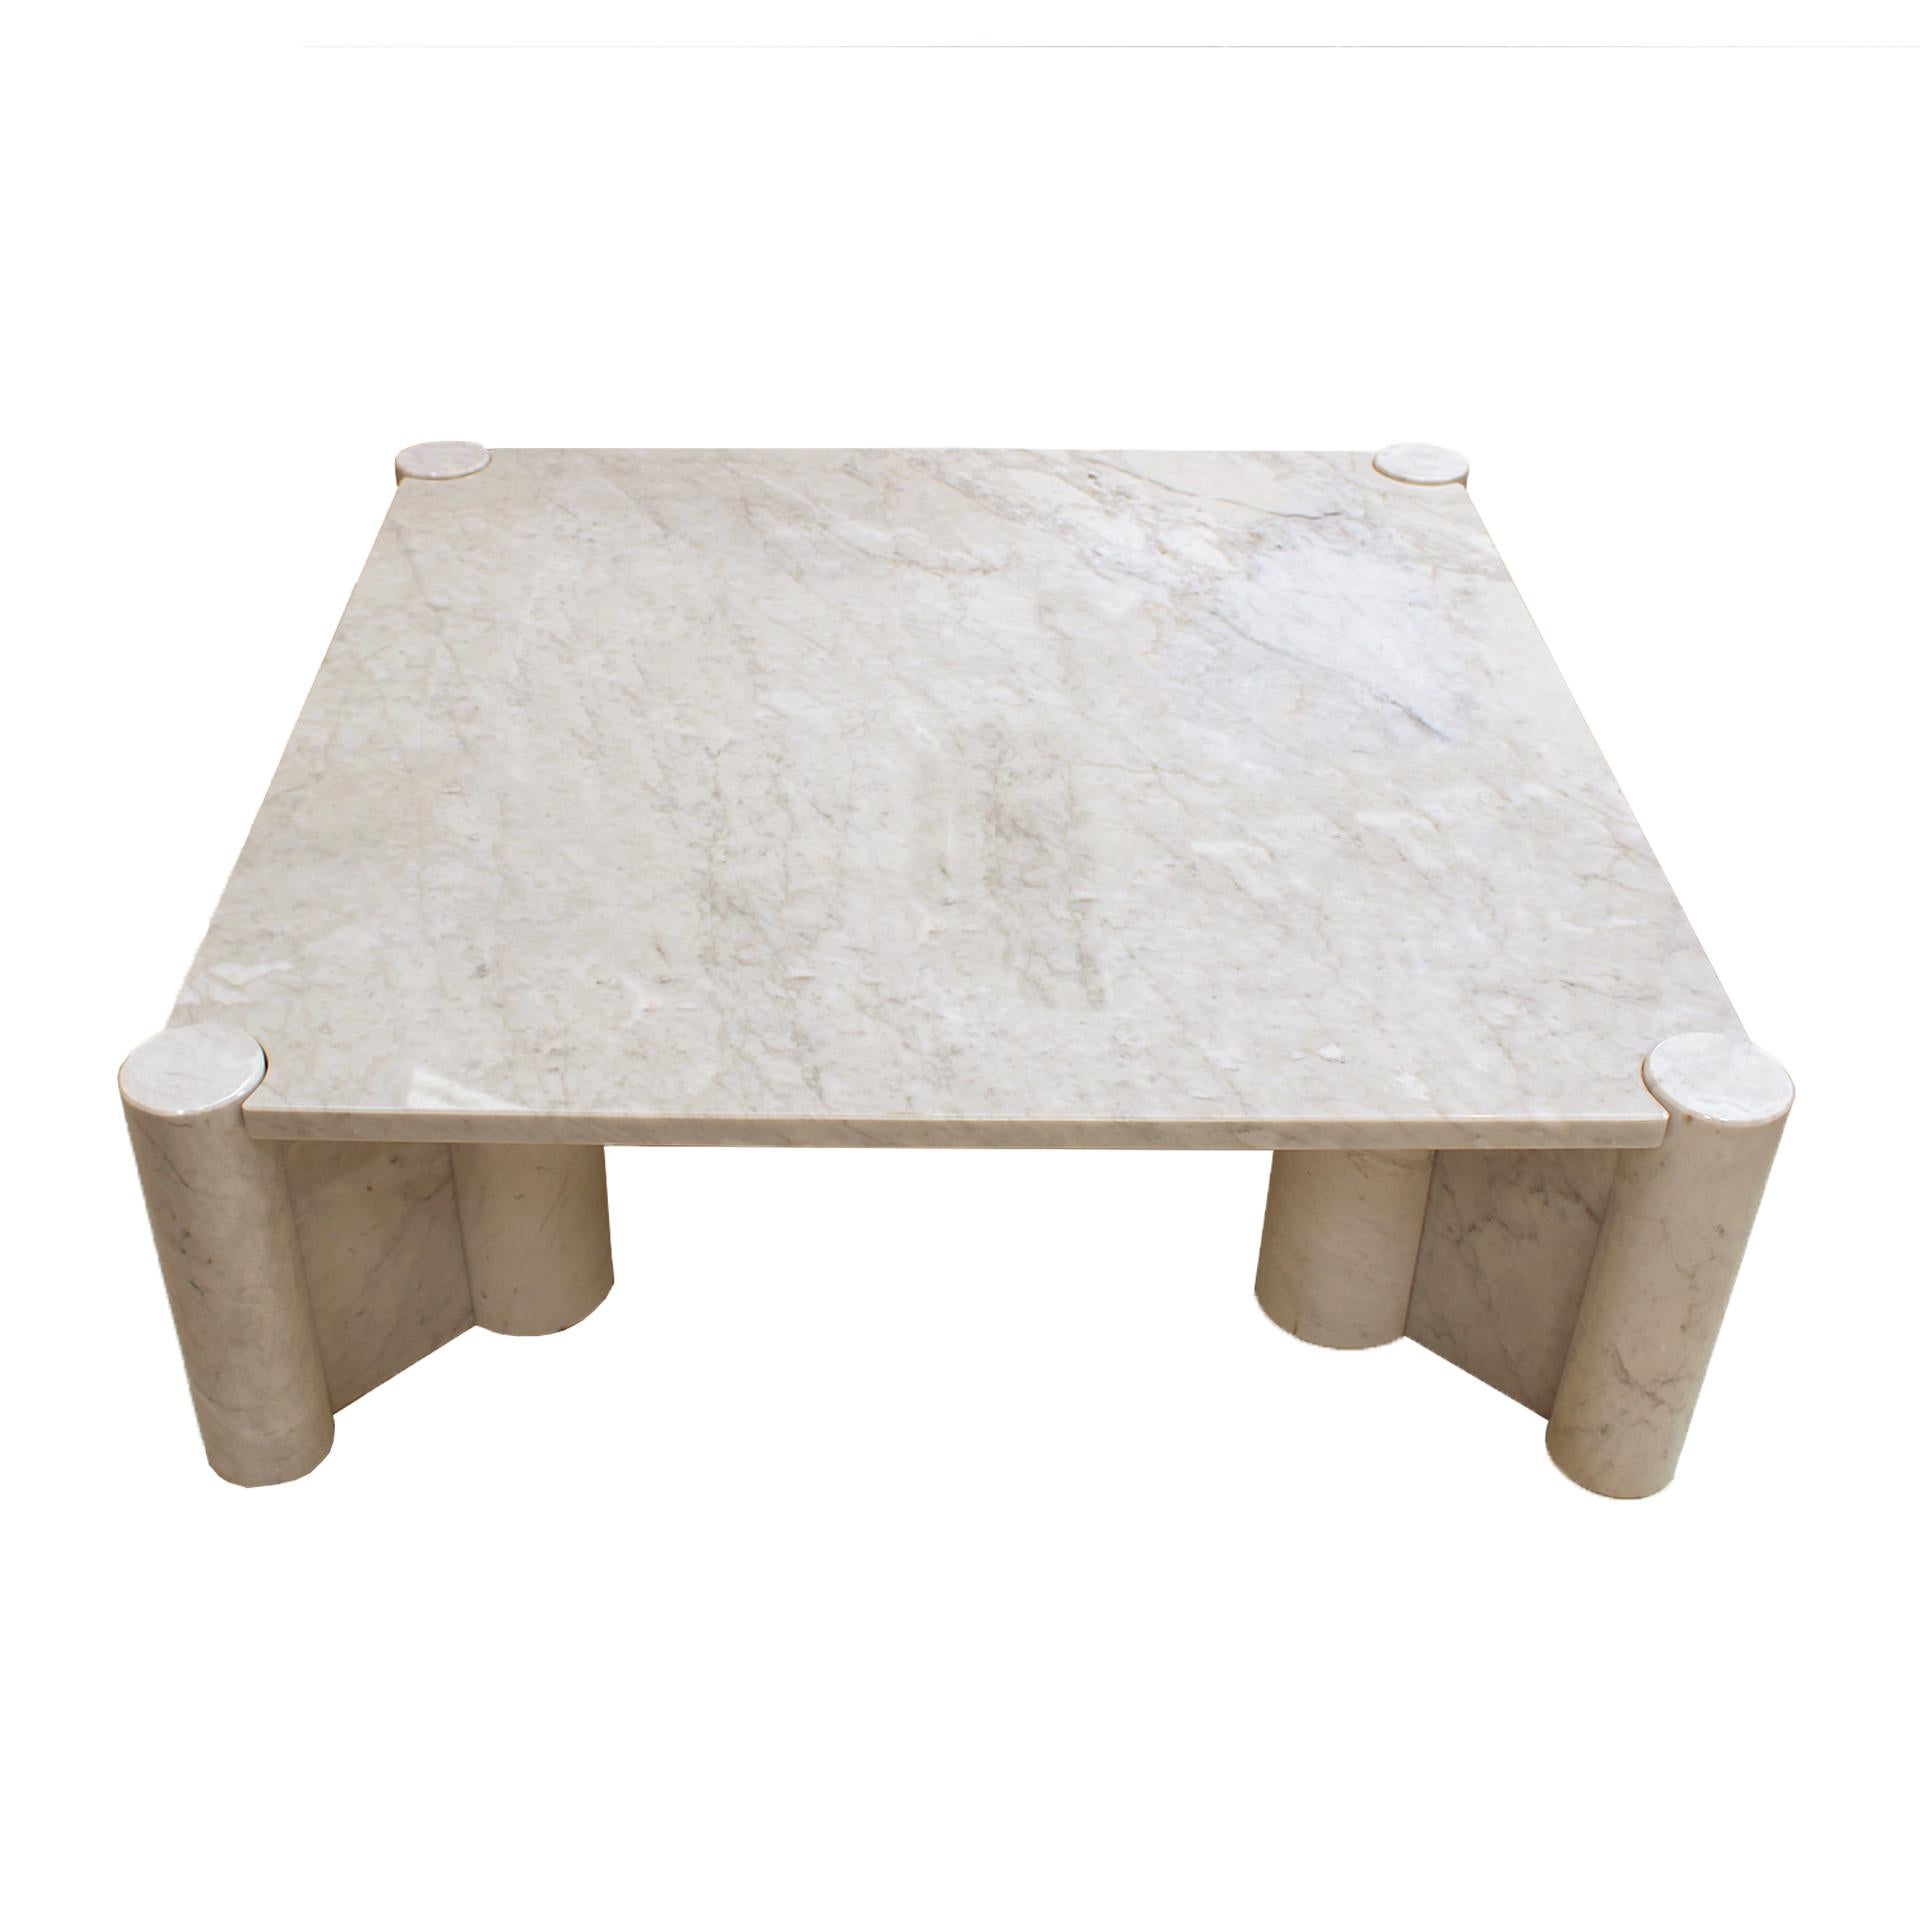 Jumbo Carrara Marble Italian Square Coffee Table by Gae Aulenti For Knoll, 1960s In Good Condition For Sale In Madrid, ES